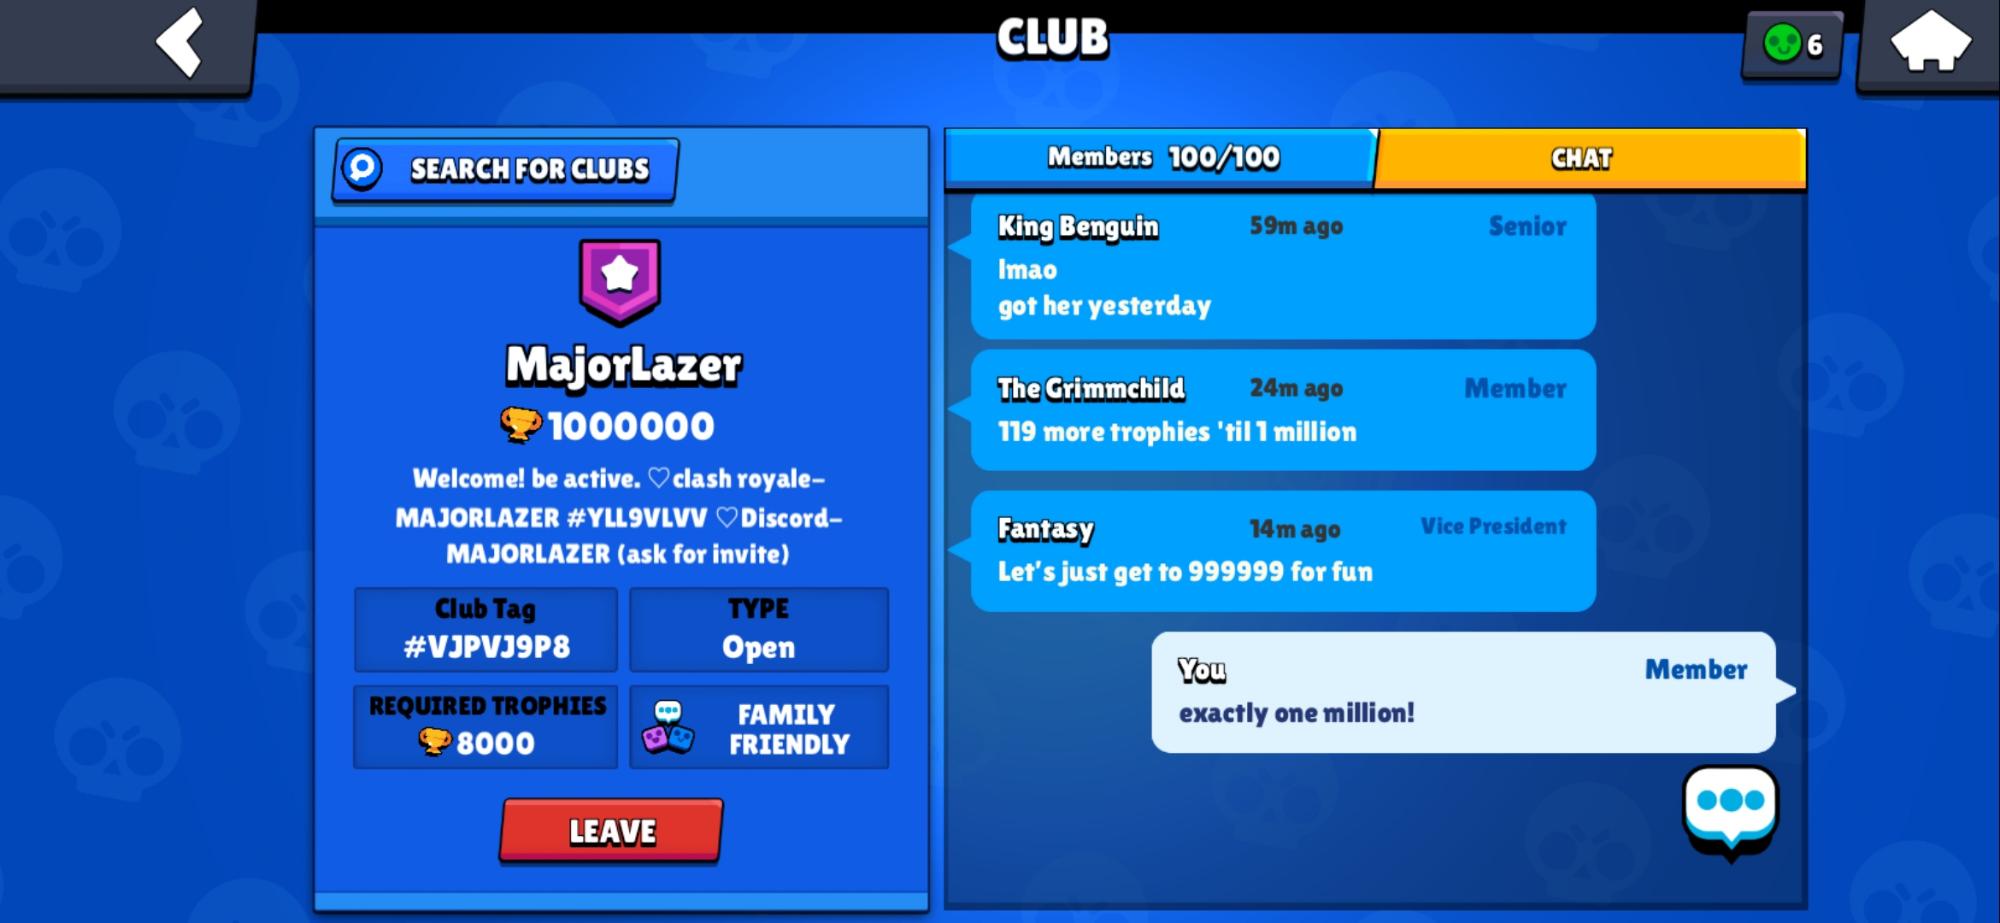 One Million Trophies Fandom - what are brawl stars clubs for